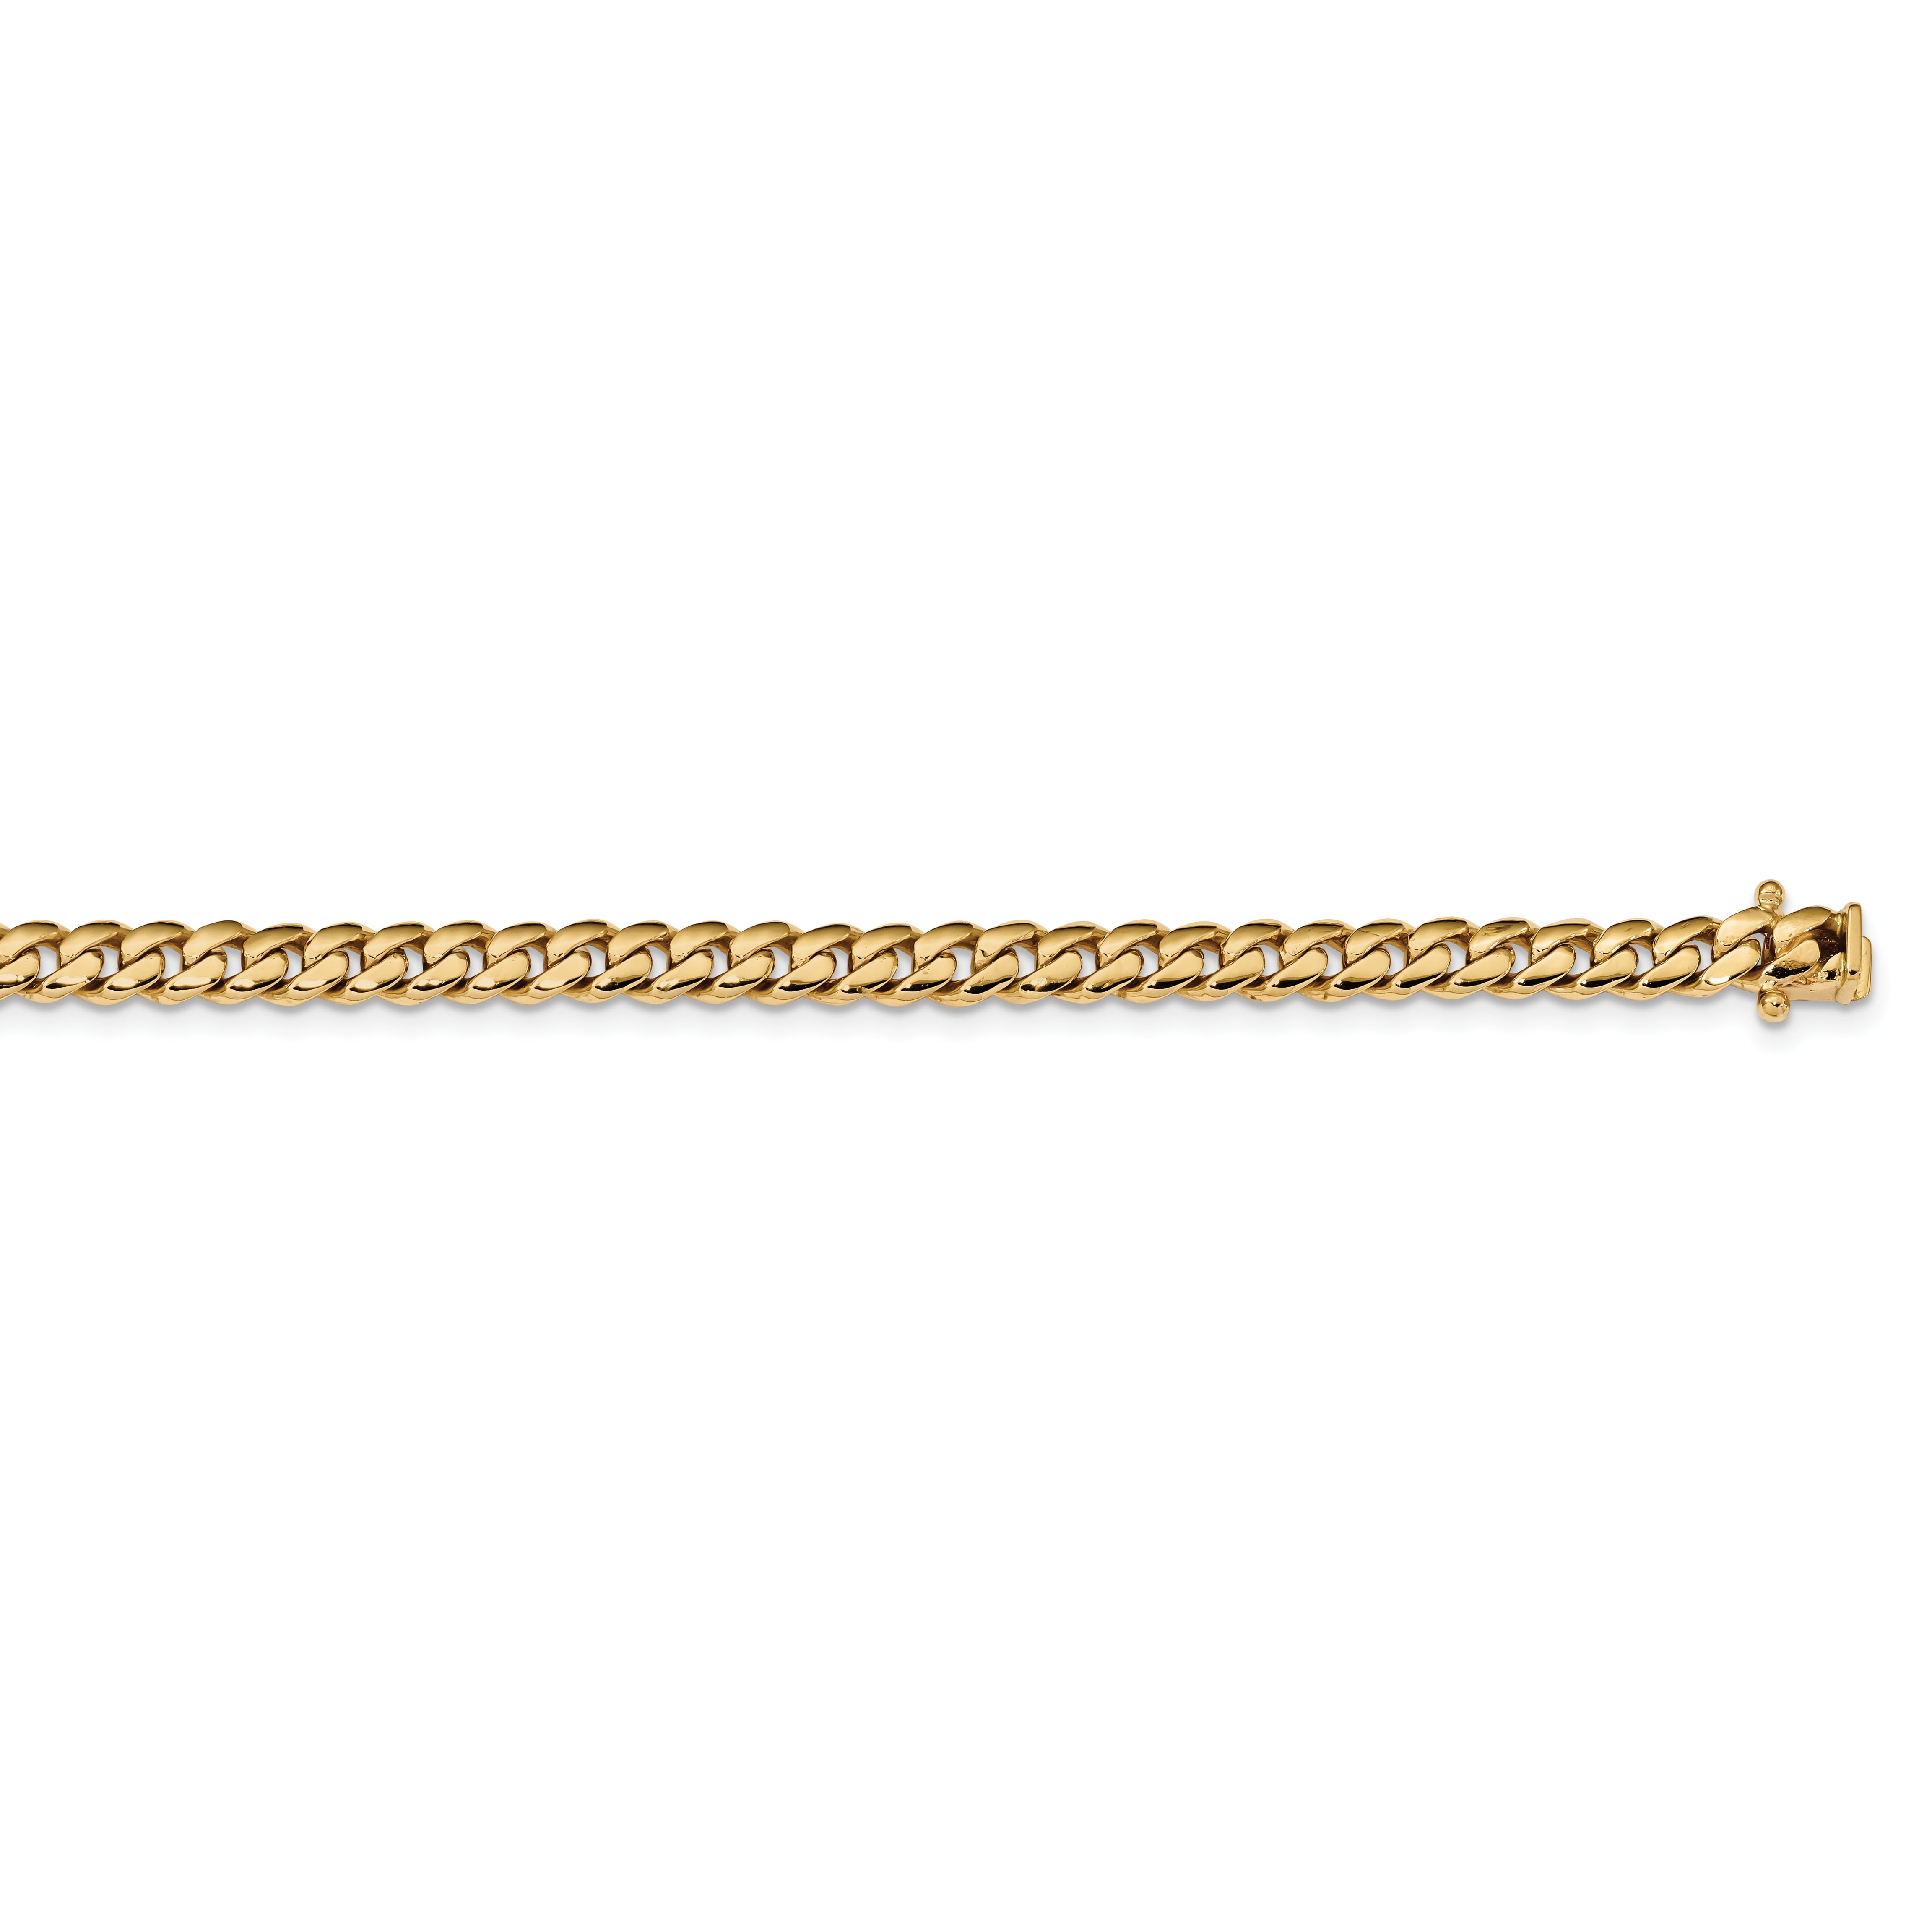 PriceRock 14k Gold 1.5mm Cable Chain Necklace 18 Inches